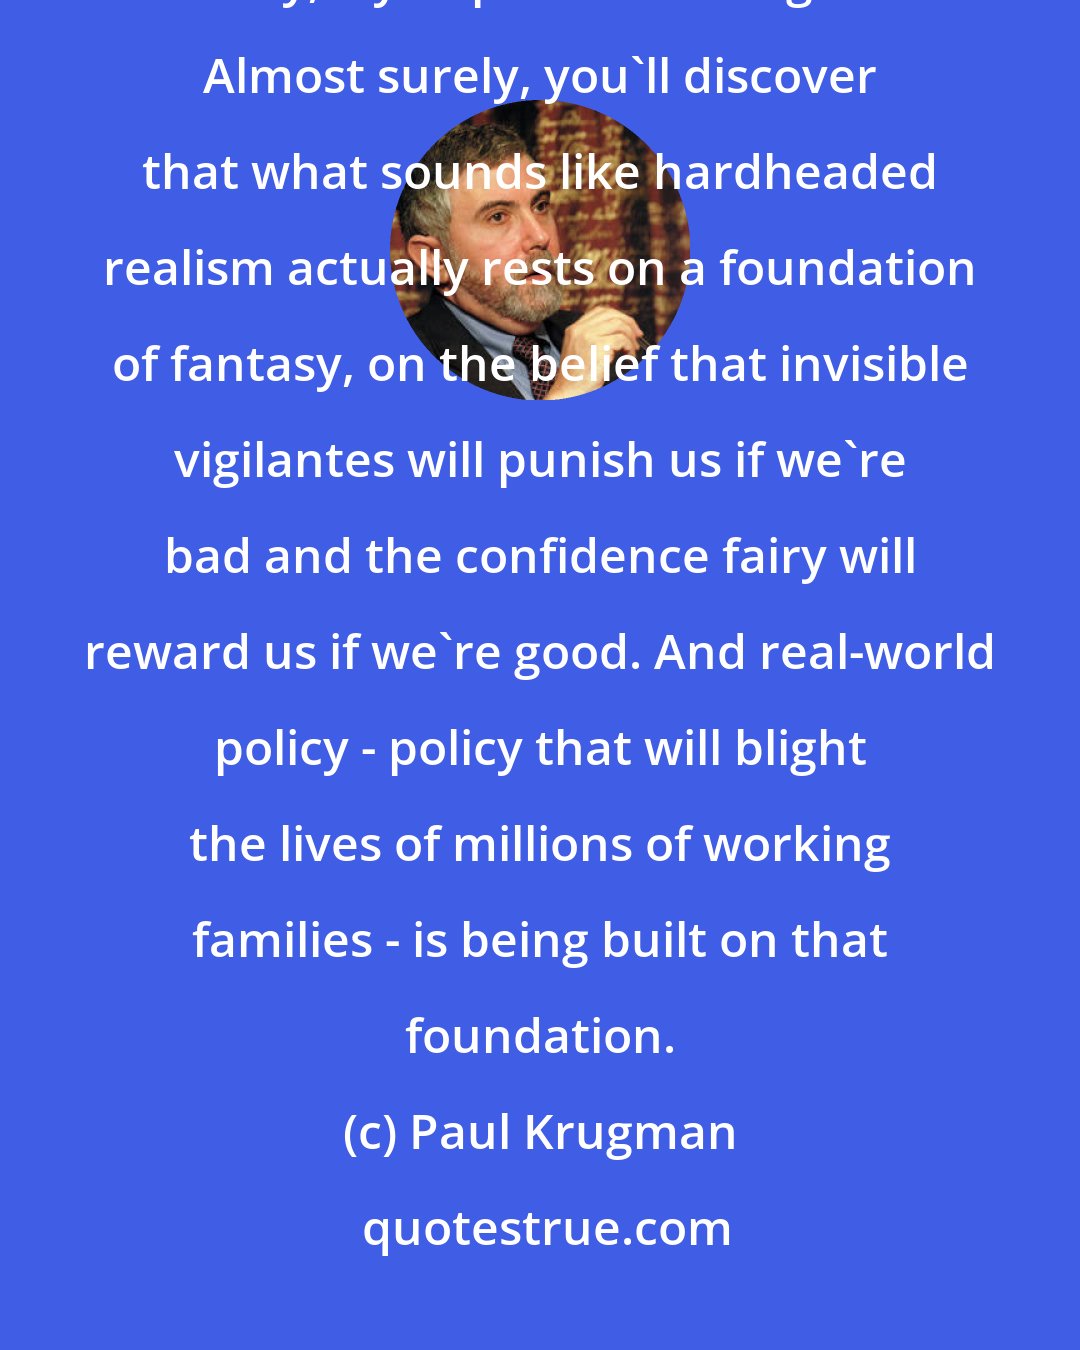 Paul Krugman: [T]he next time you hear serious-sounding people explaining the need for fiscal austerity, try to parse their argument. Almost surely, you'll discover that what sounds like hardheaded realism actually rests on a foundation of fantasy, on the belief that invisible vigilantes will punish us if we're bad and the confidence fairy will reward us if we're good. And real-world policy - policy that will blight the lives of millions of working families - is being built on that foundation.